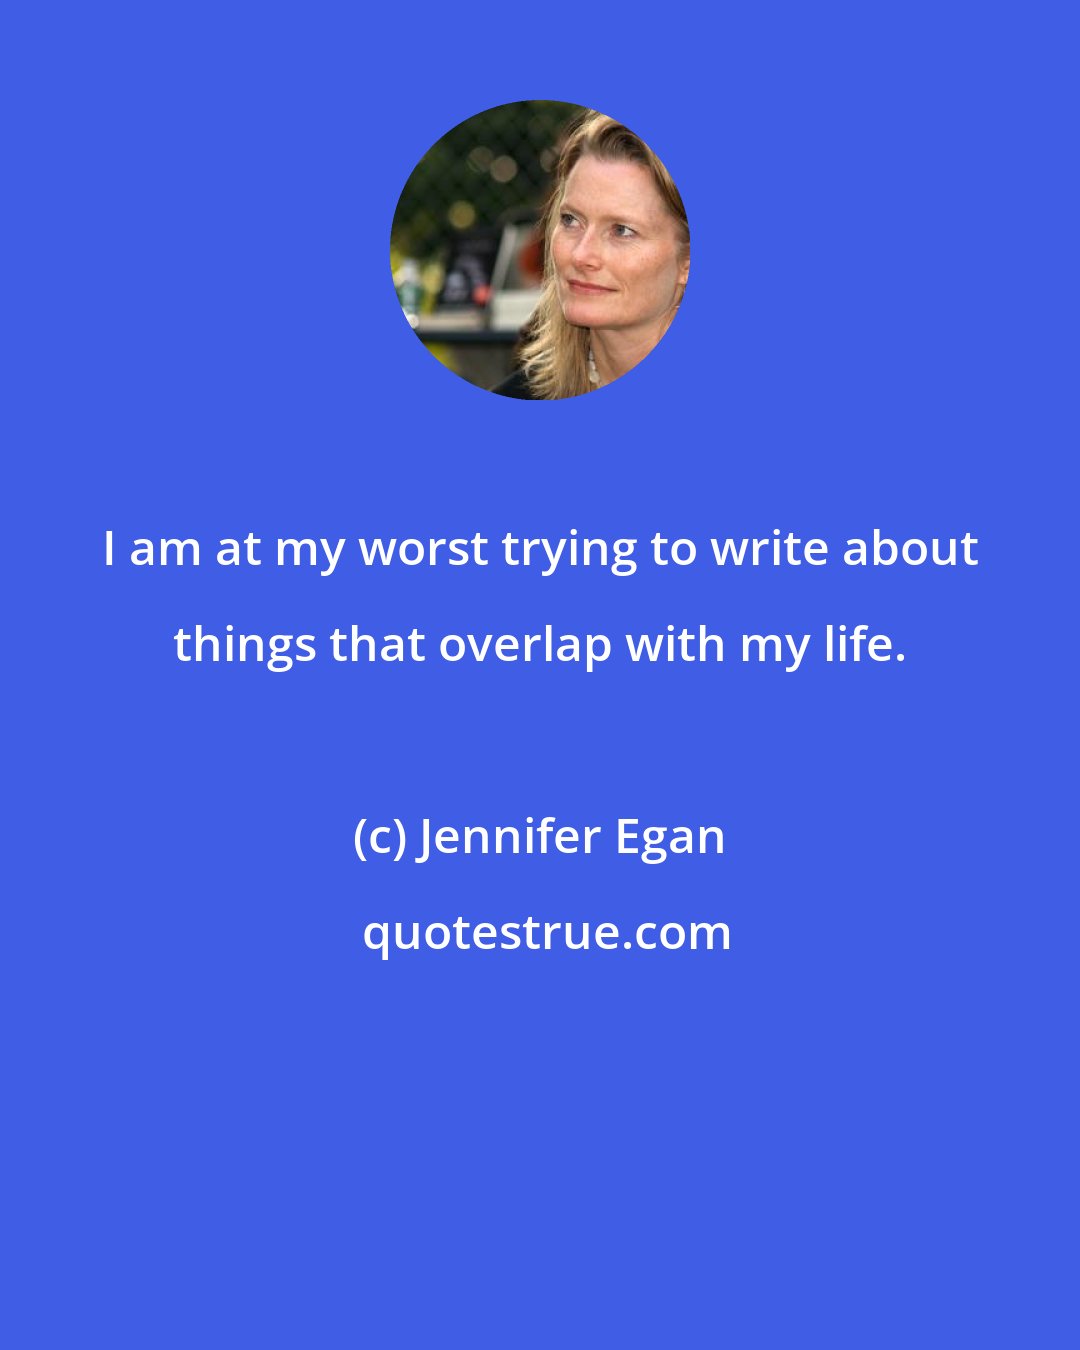 Jennifer Egan: I am at my worst trying to write about things that overlap with my life.